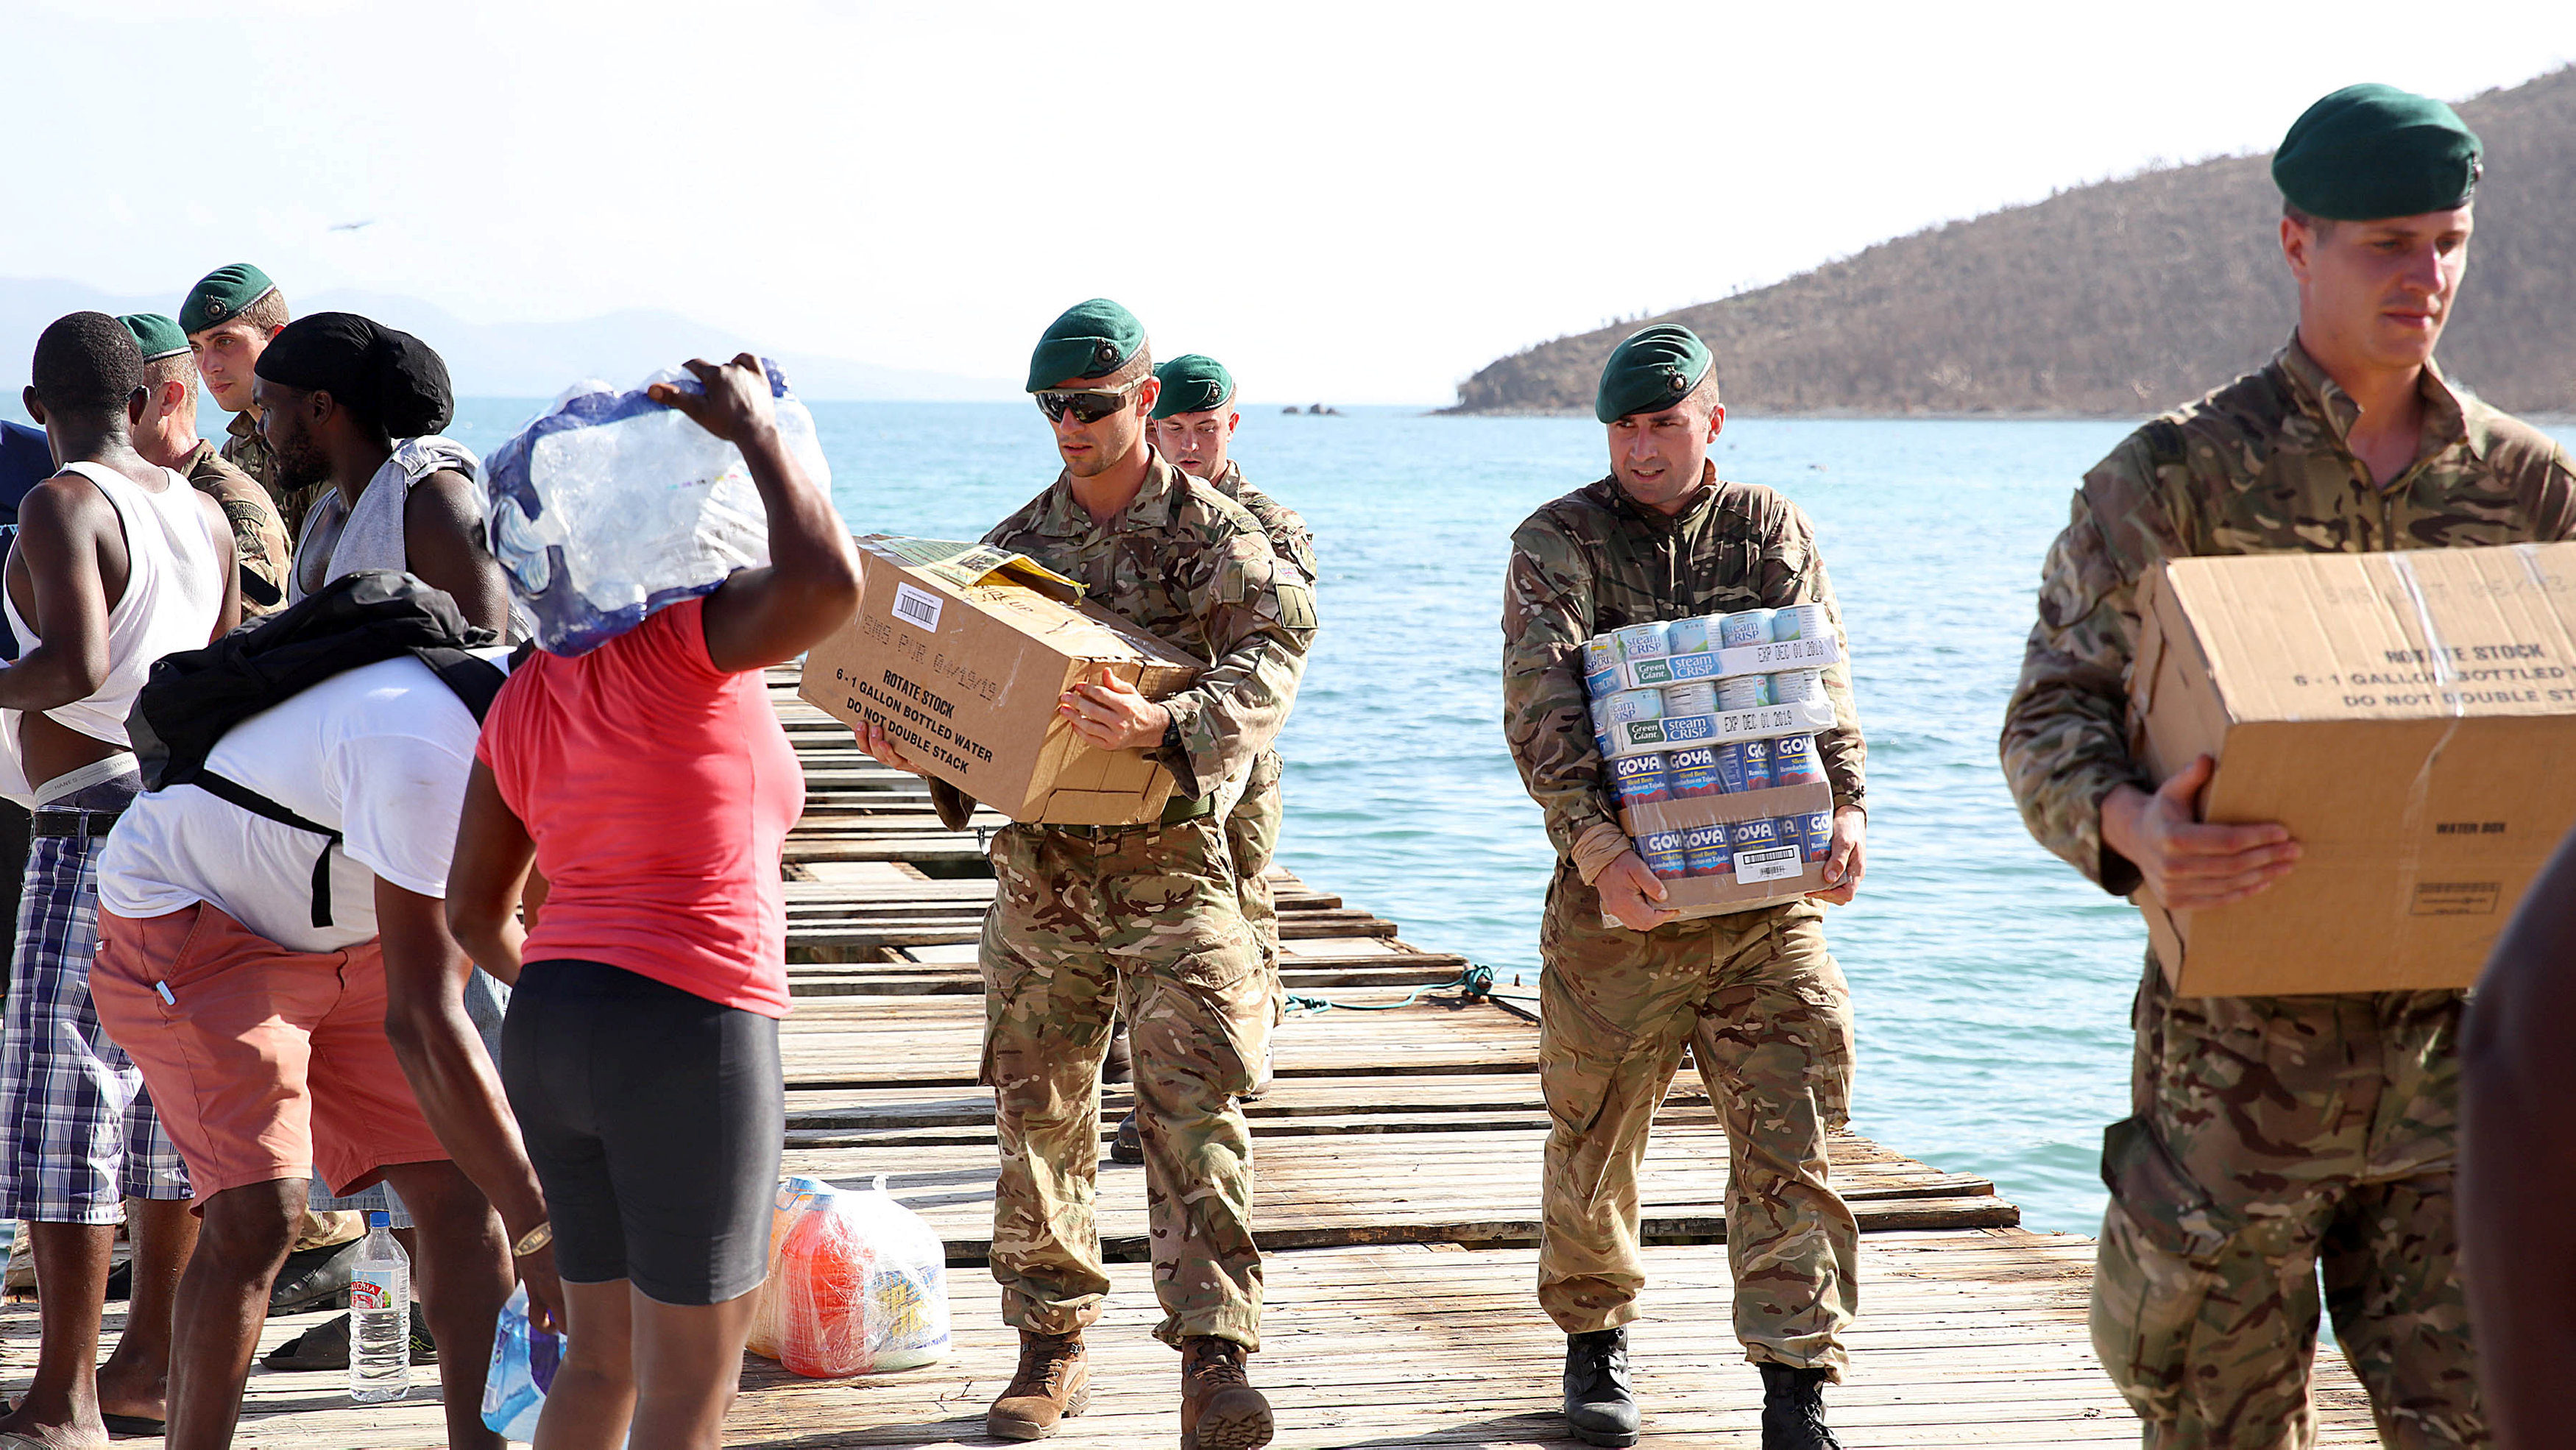 British Army Commandos take part in recovery efforts after hurricane Irma passed Tortola, in the British Virgin Islands on Sept. 11, 2017. (Captain George Eatwell RM/Ministry of Defence handout via Reuters)